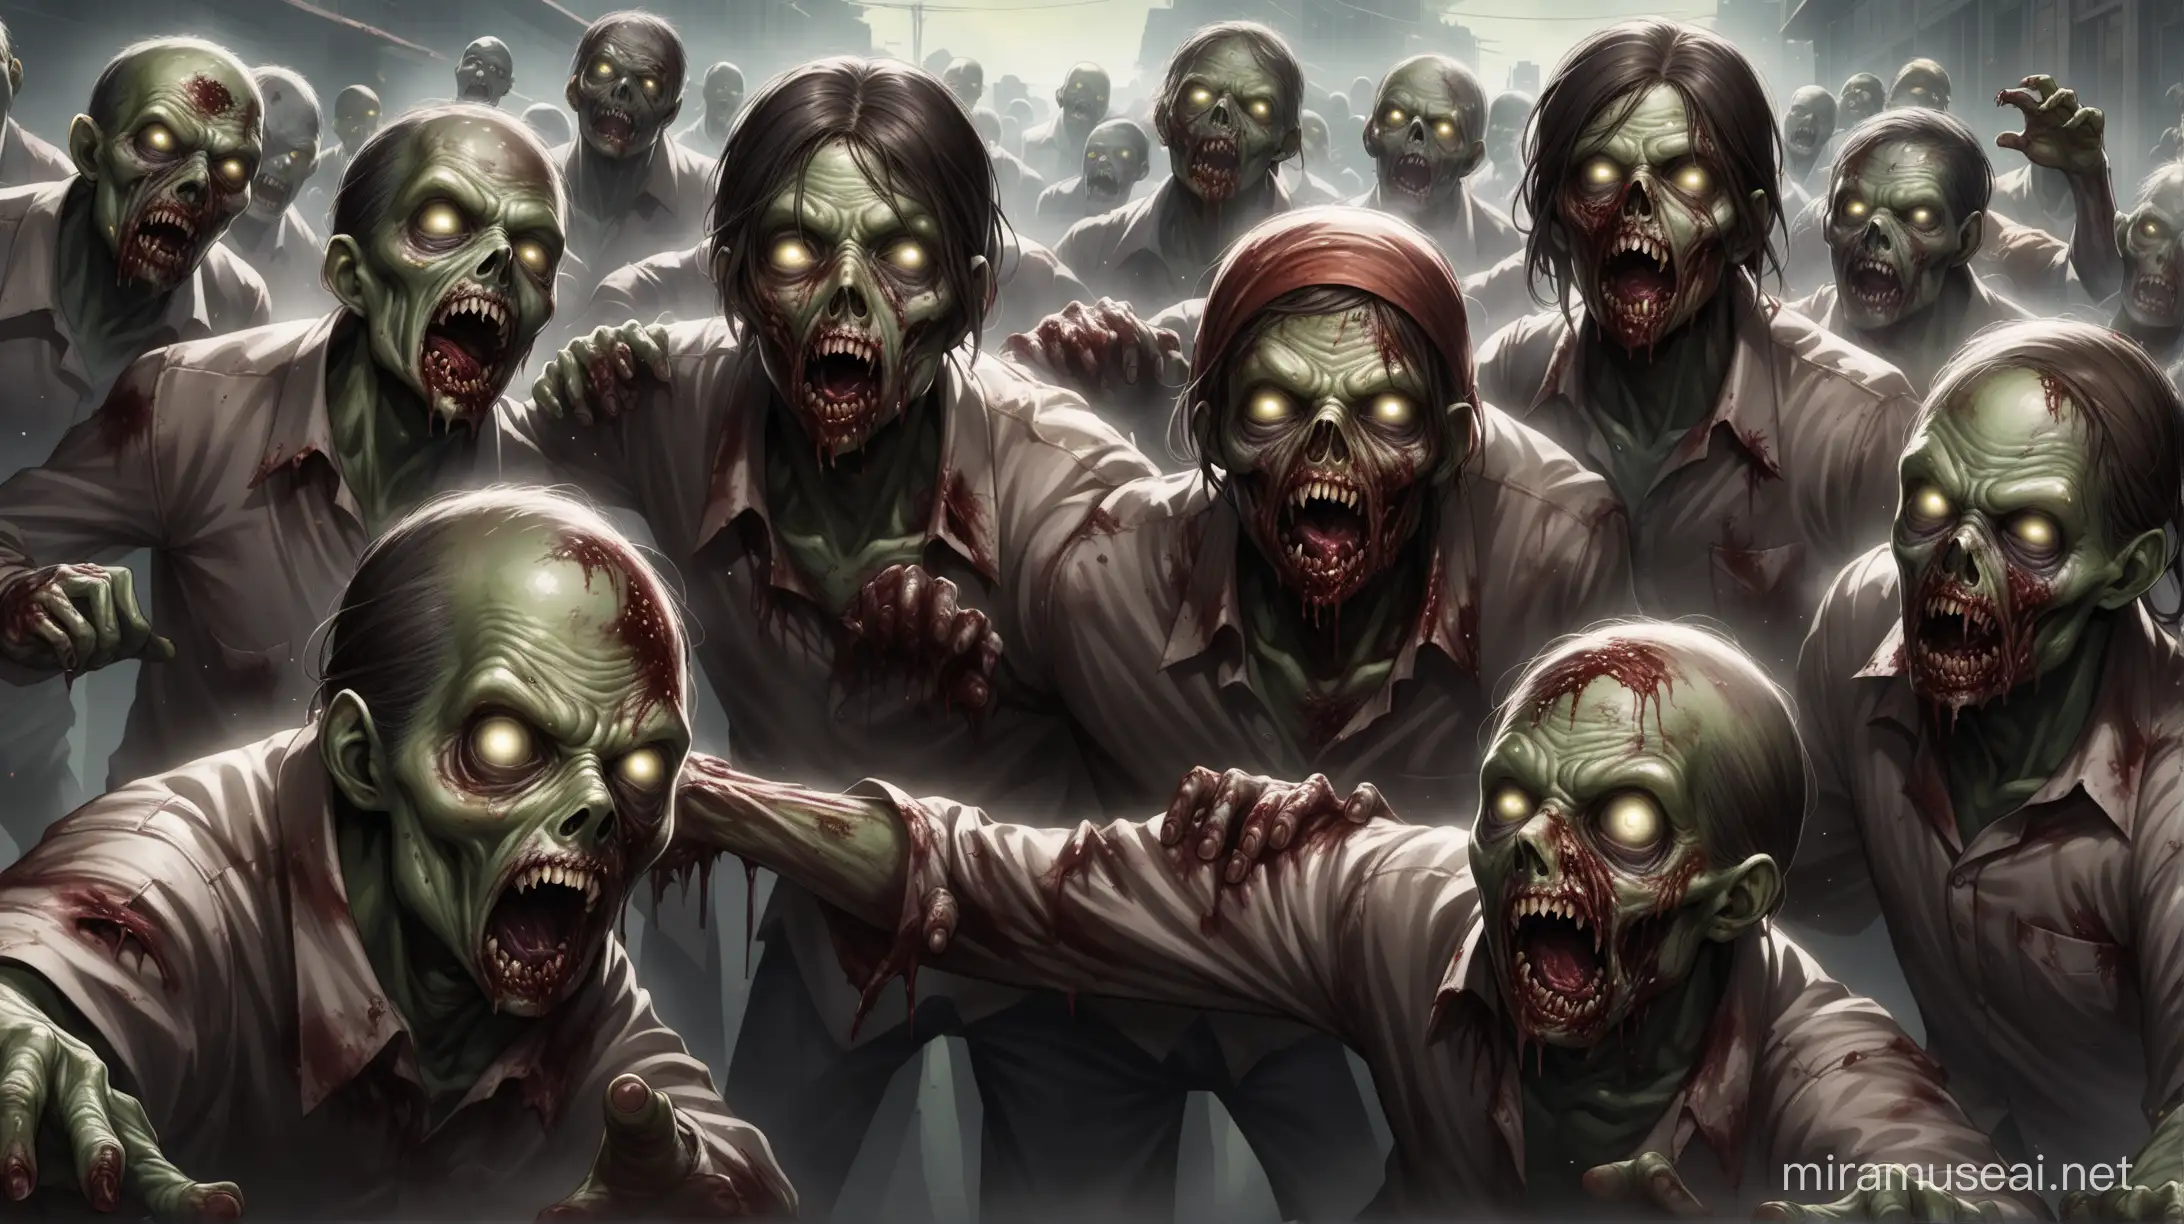 Horde of Zombie Clusters with Gruesome Reaching and Grabbing Gestures